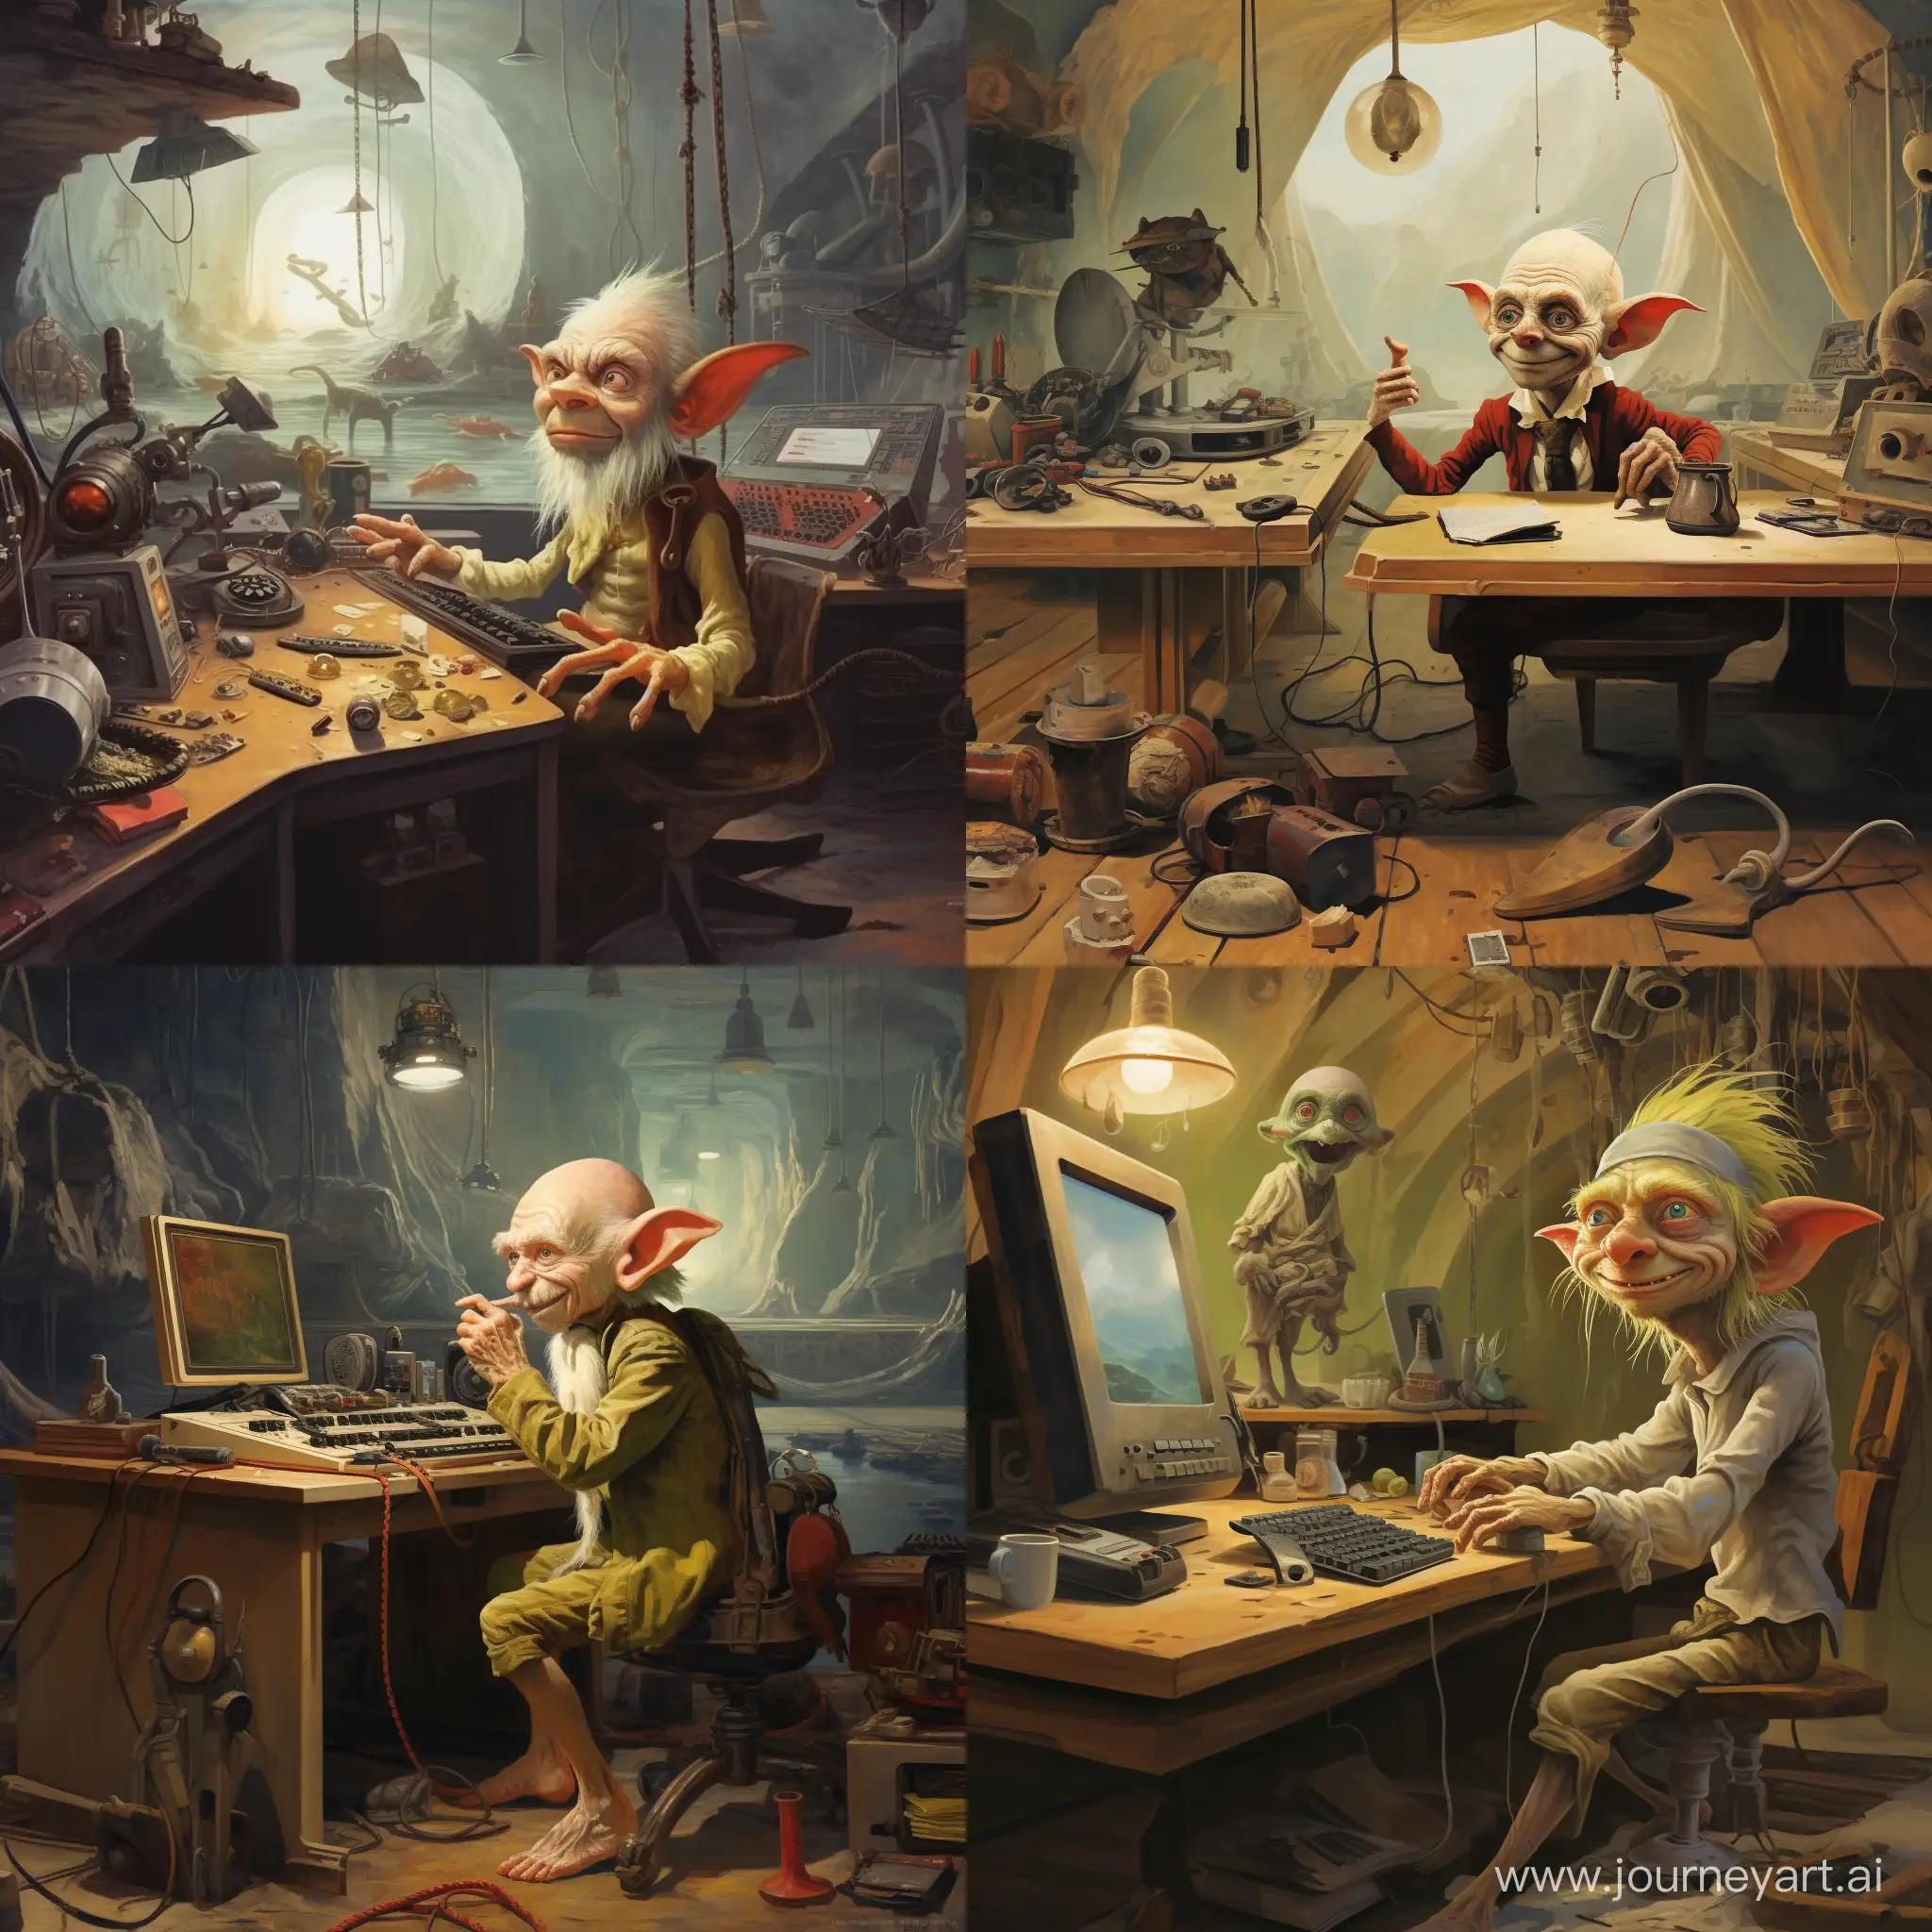 like an edvard munch painting a sad and smiling scandinavian goblin nisse is playing the flute and dancing on the table in an interior futuristic office in which there is a lot of computers, spaceship controls and steampunk computermonitors in the office